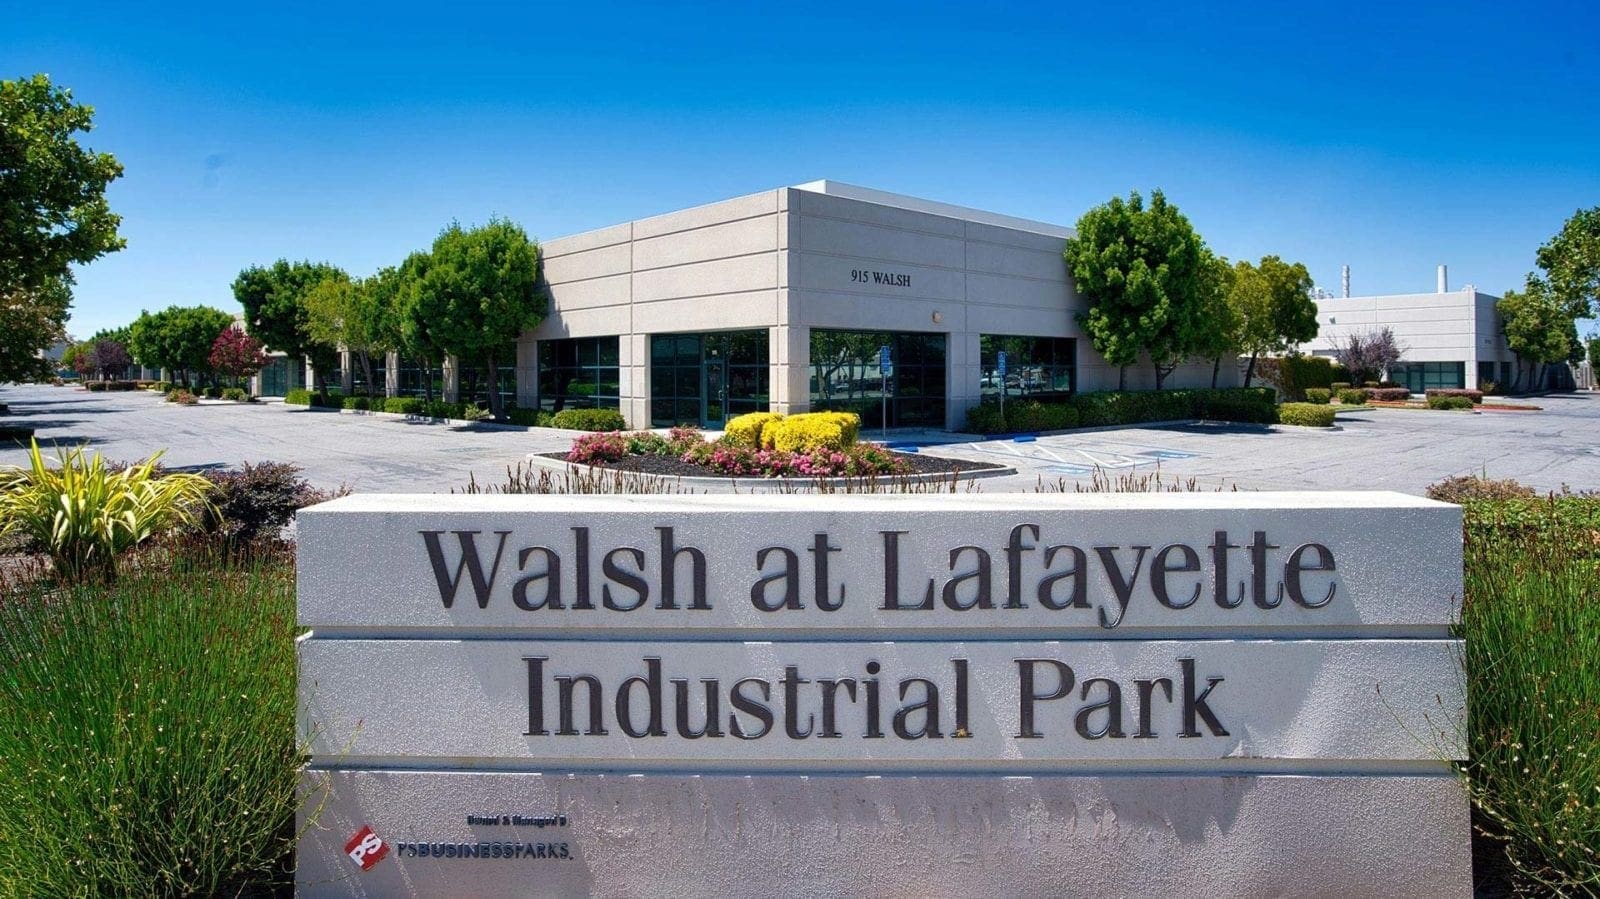 Walsh at Lafayette Industrial Park exterior with entrance sign photo